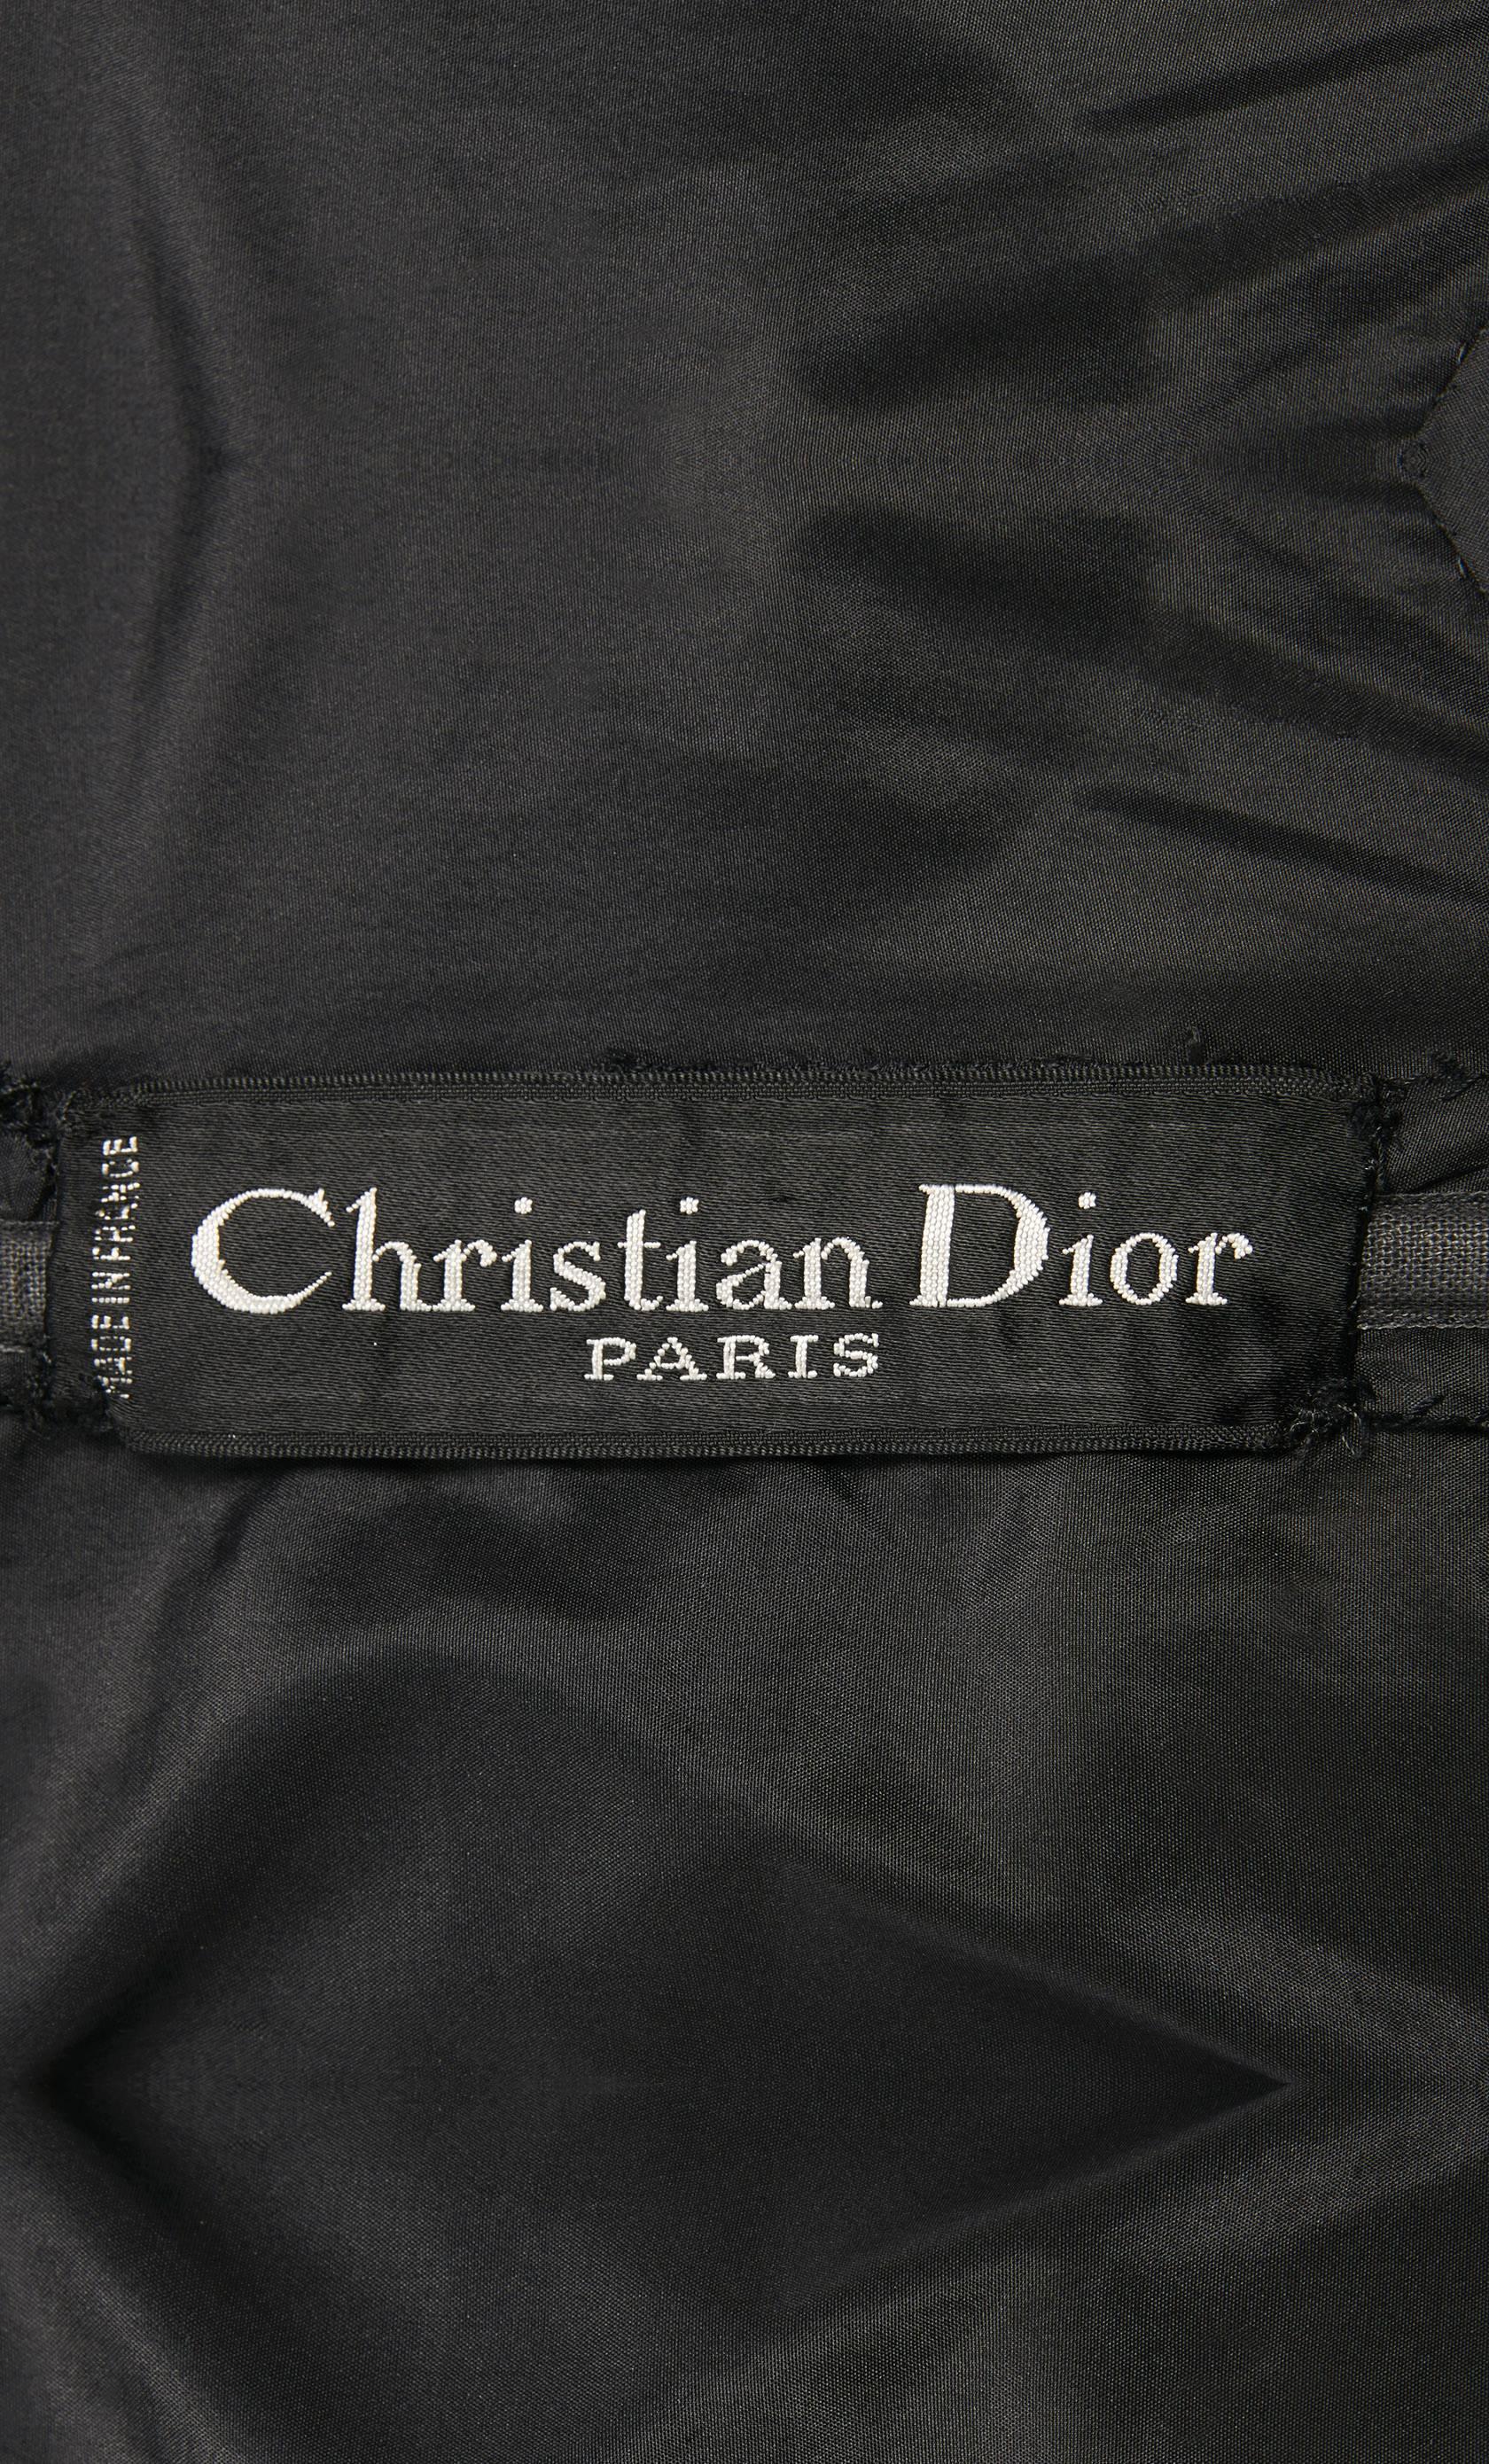 Dior haute couture black dress, Autumn/Winter 1959 In Excellent Condition For Sale In London, GB